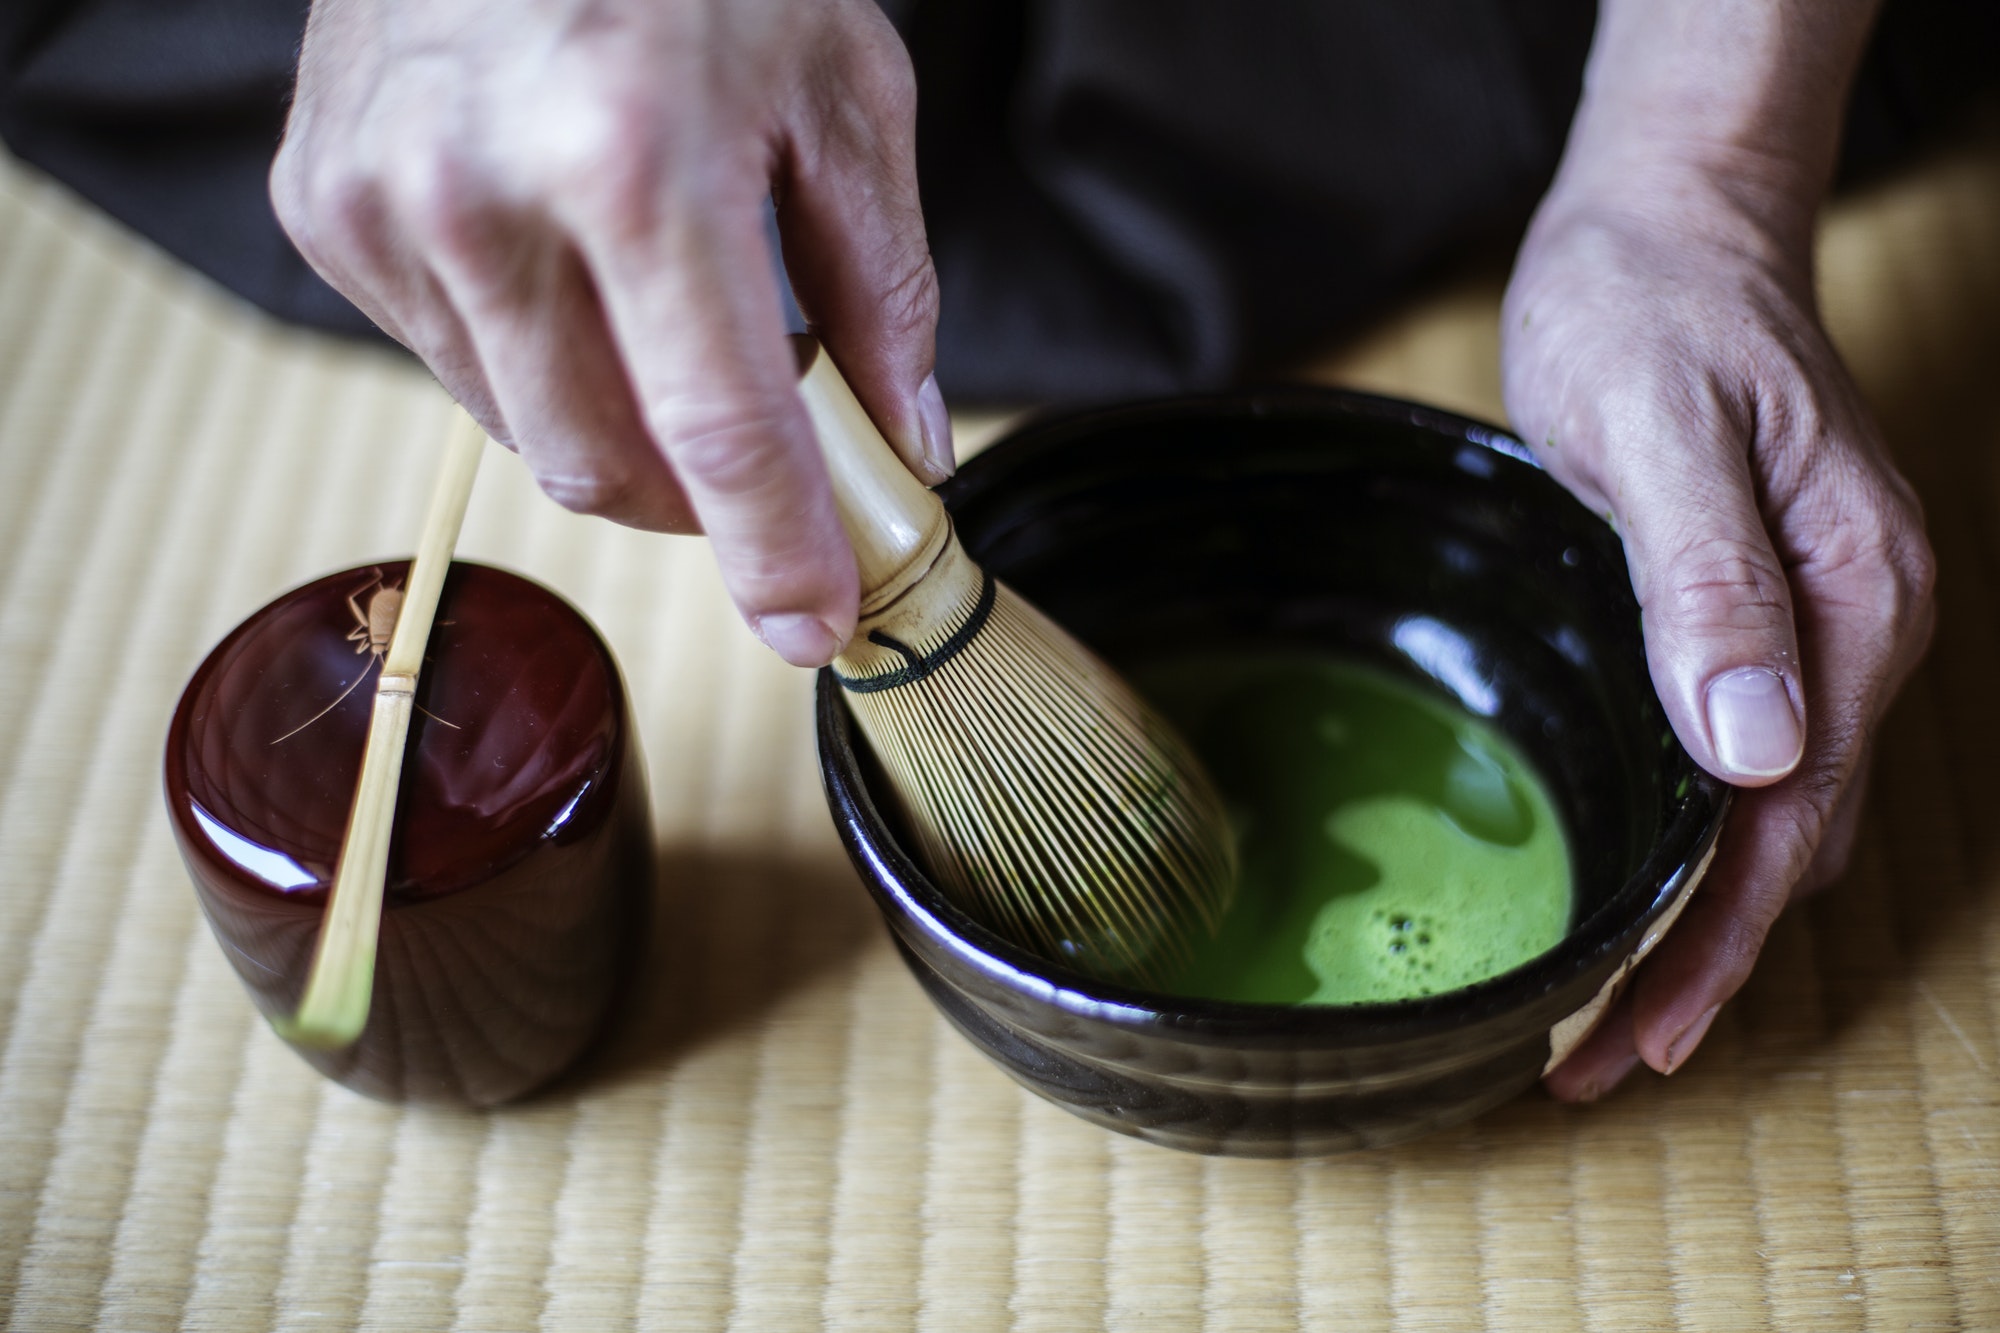 Traditional Japanese Tea Ceremony, man using whisk to prepare green tea.